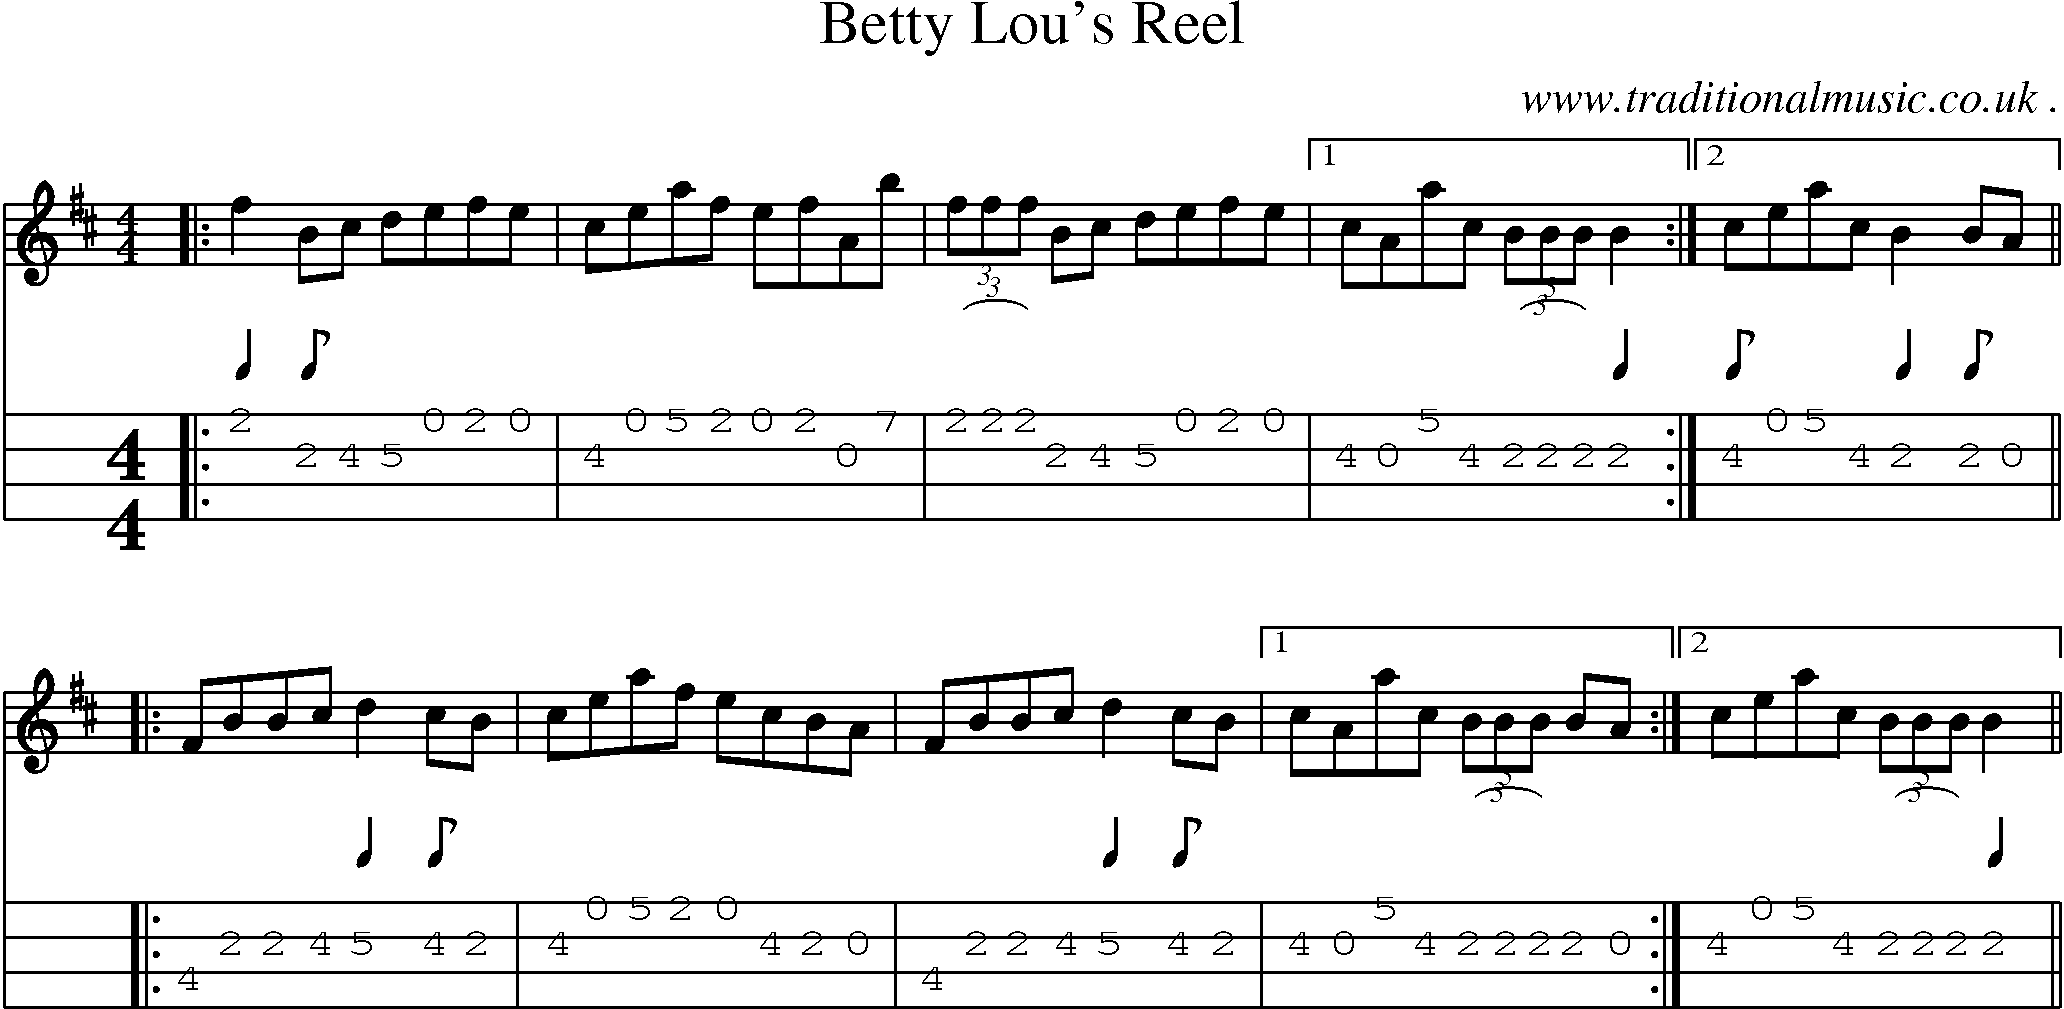 Music Score and Guitar Tabs for Betty Lous Reel